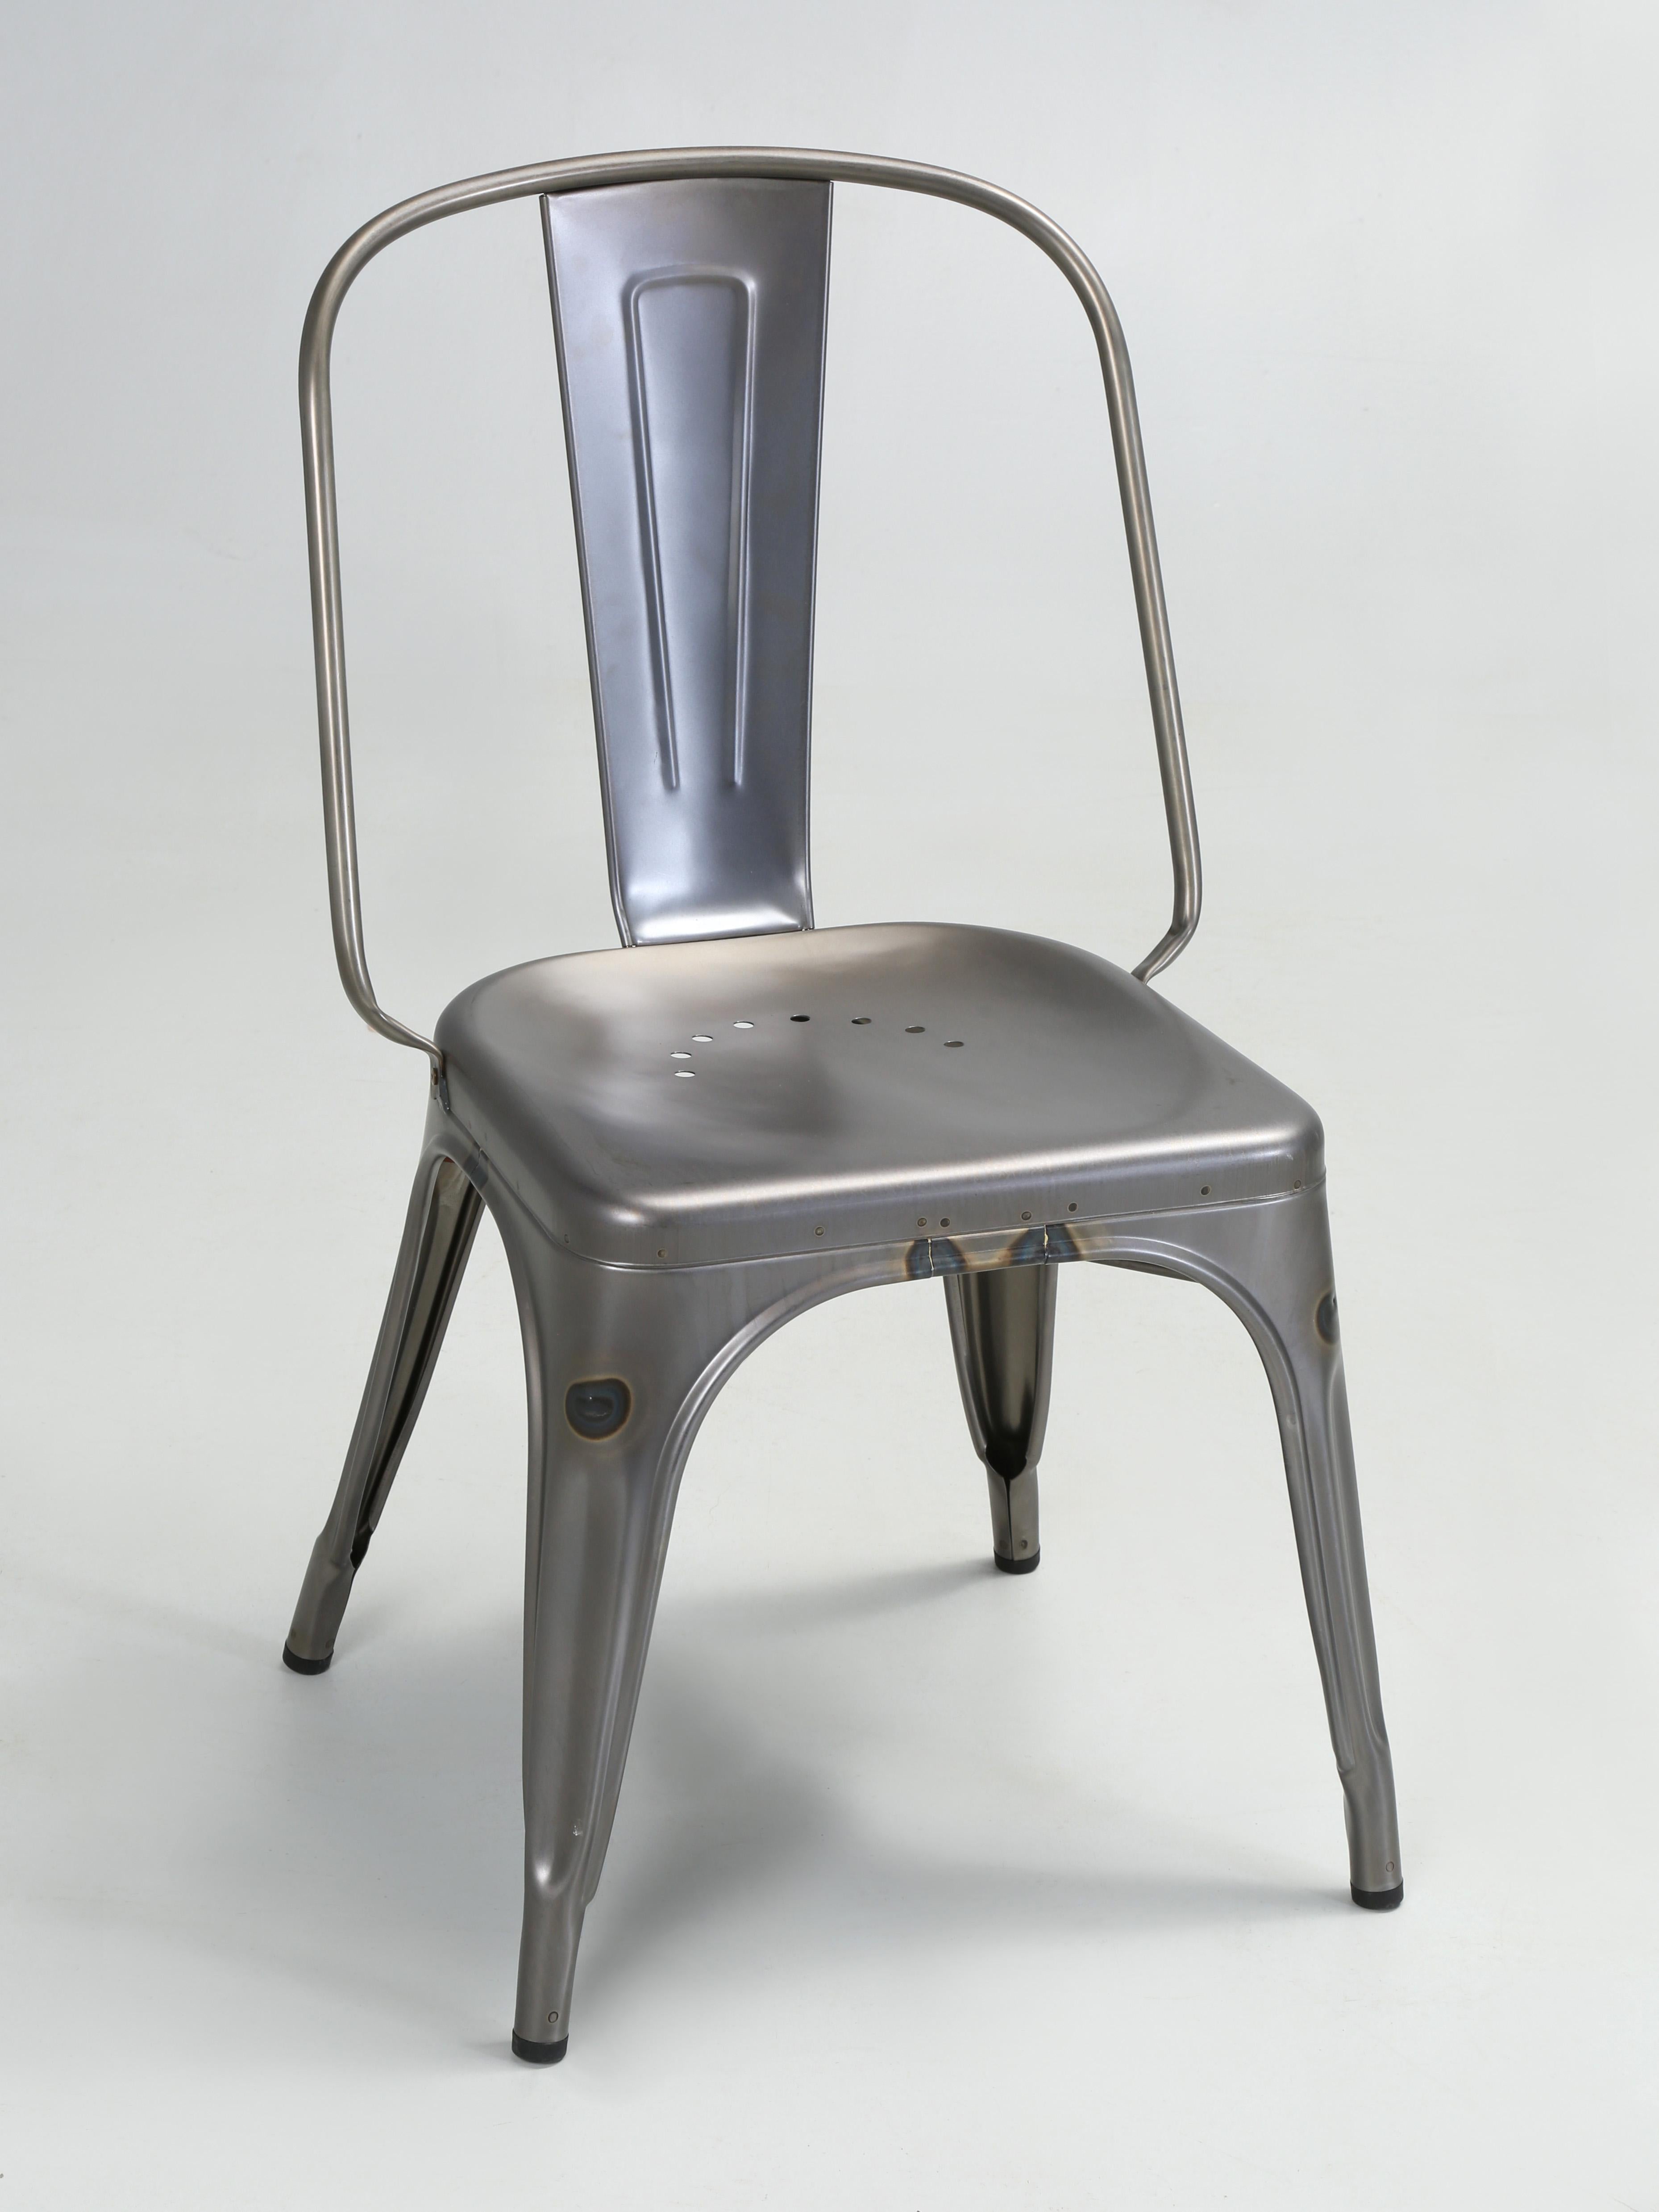 Genuine Made in France Set of (6) Tolix Steel Stacking Chairs that have an eggshell clear powder-coated finish applied. We currently have over (1000) pieces of Tolix in Stock available for immediate delivery, including Tolix Counter and Bar Stools